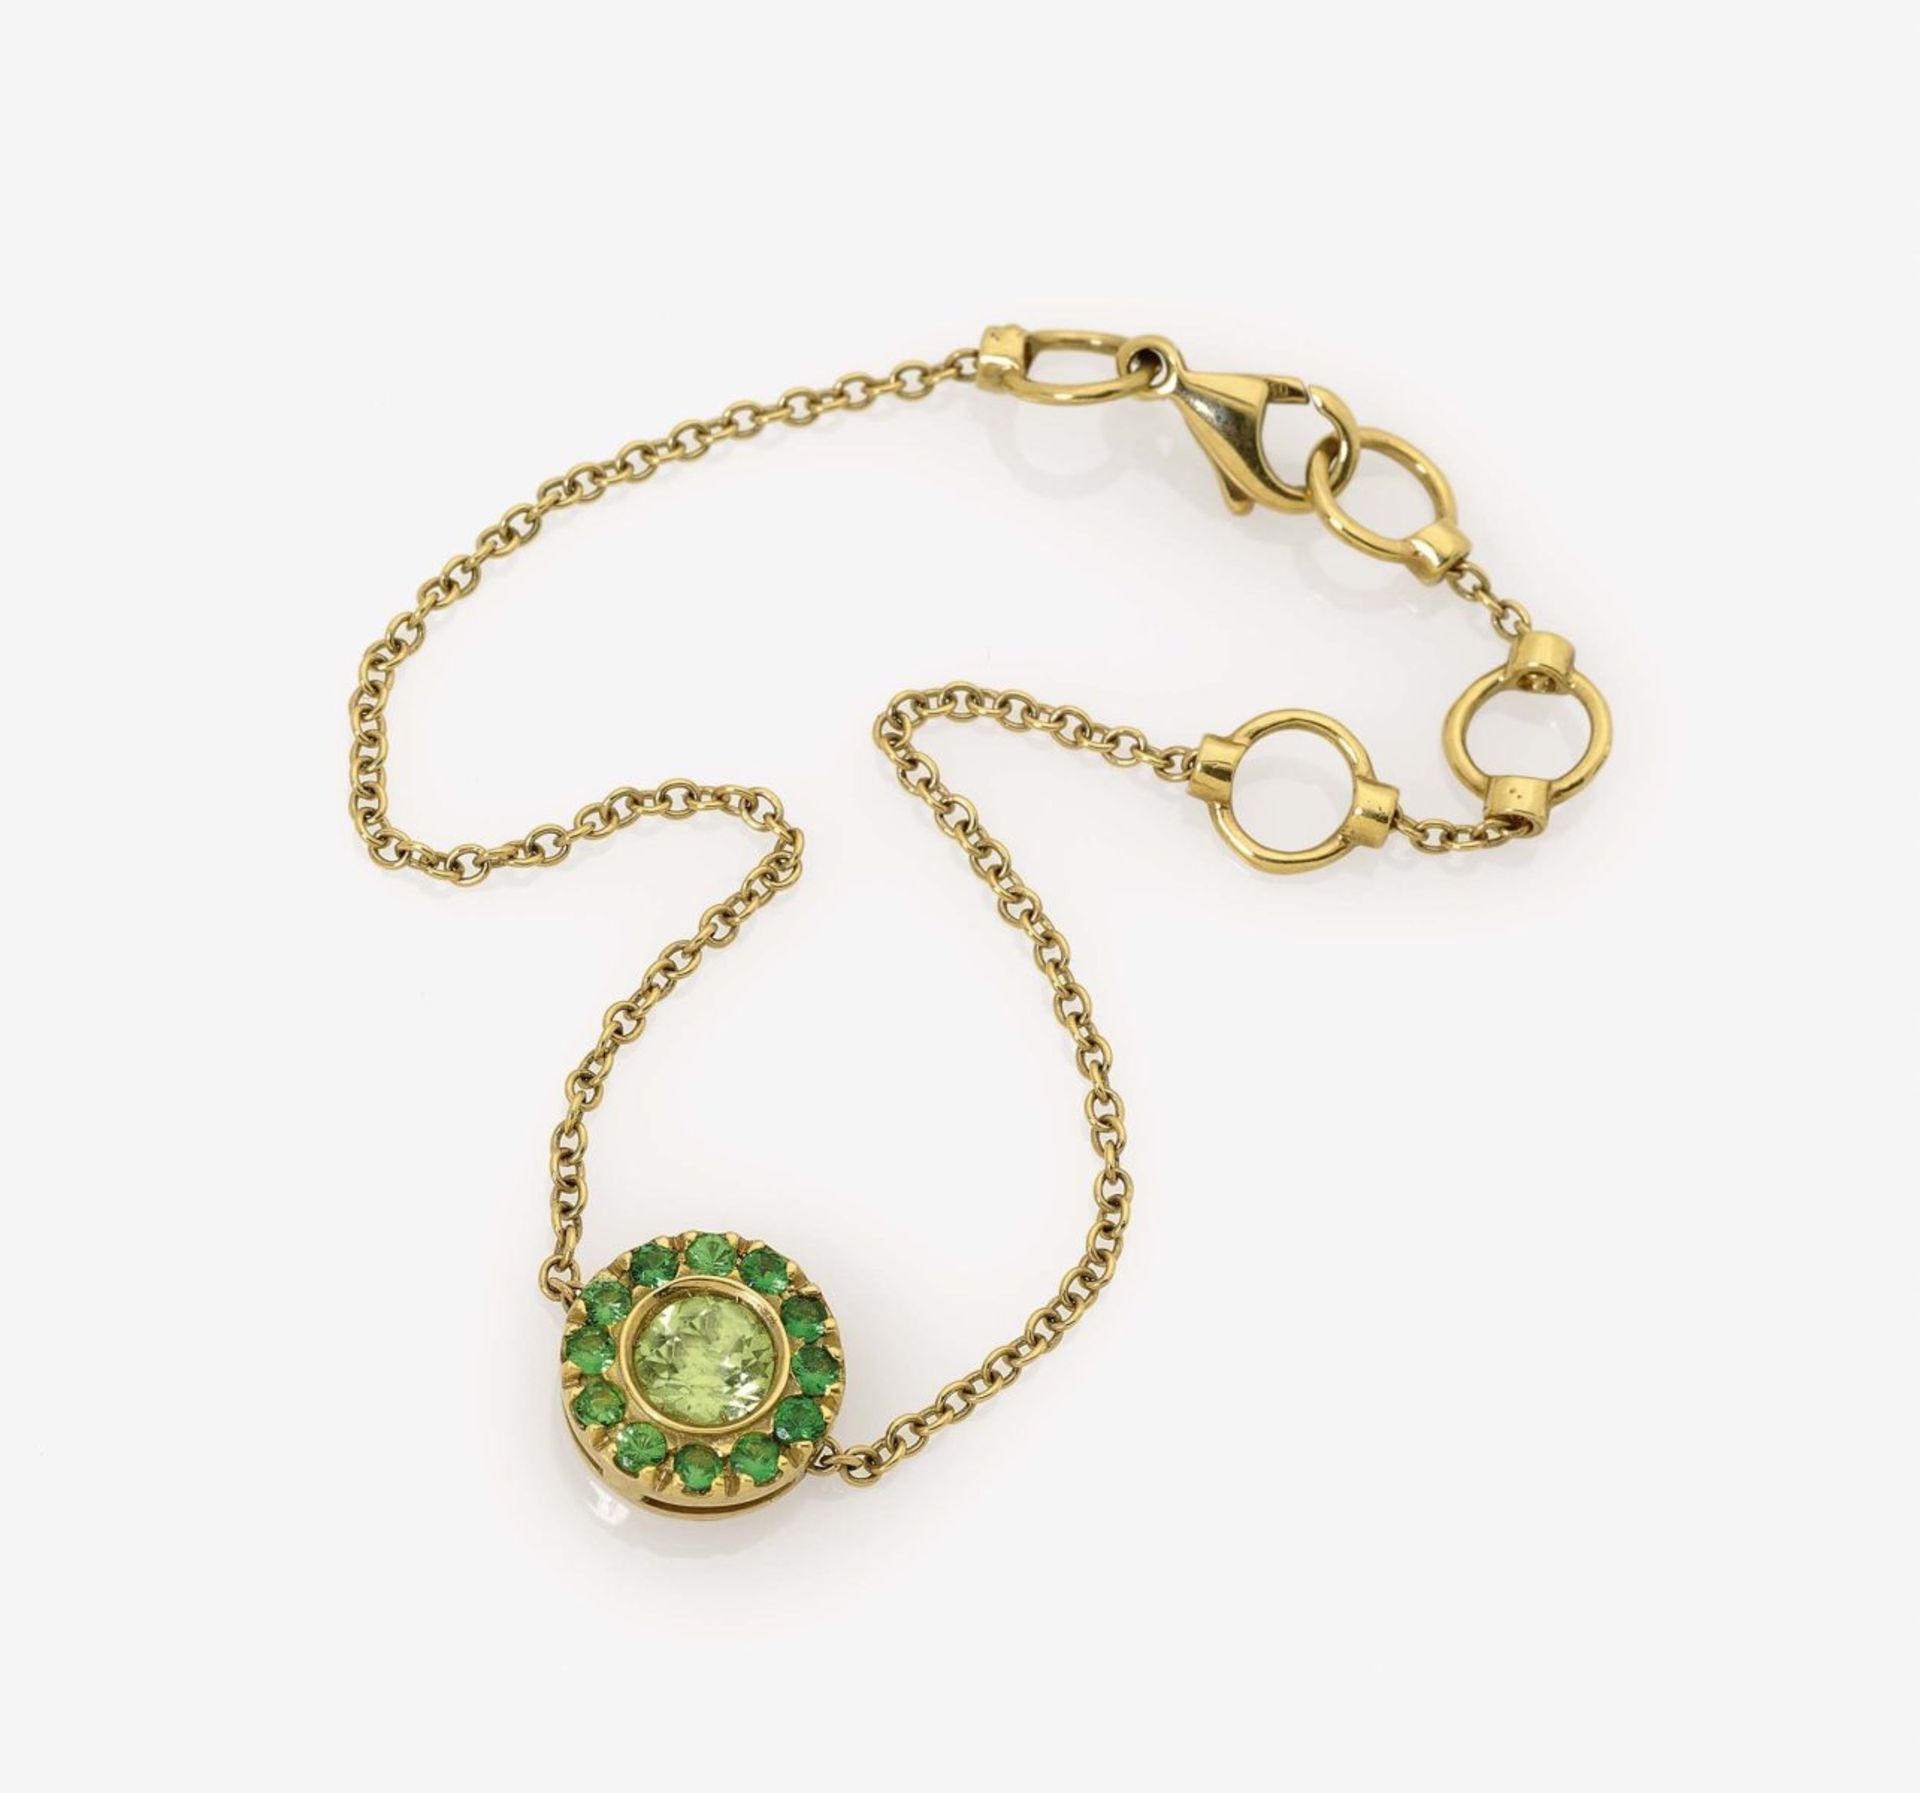 A Peridot and Emerald Bracelet18K yellow gold (750/-), stamped. Maker's marks. 1 brilliant-cut